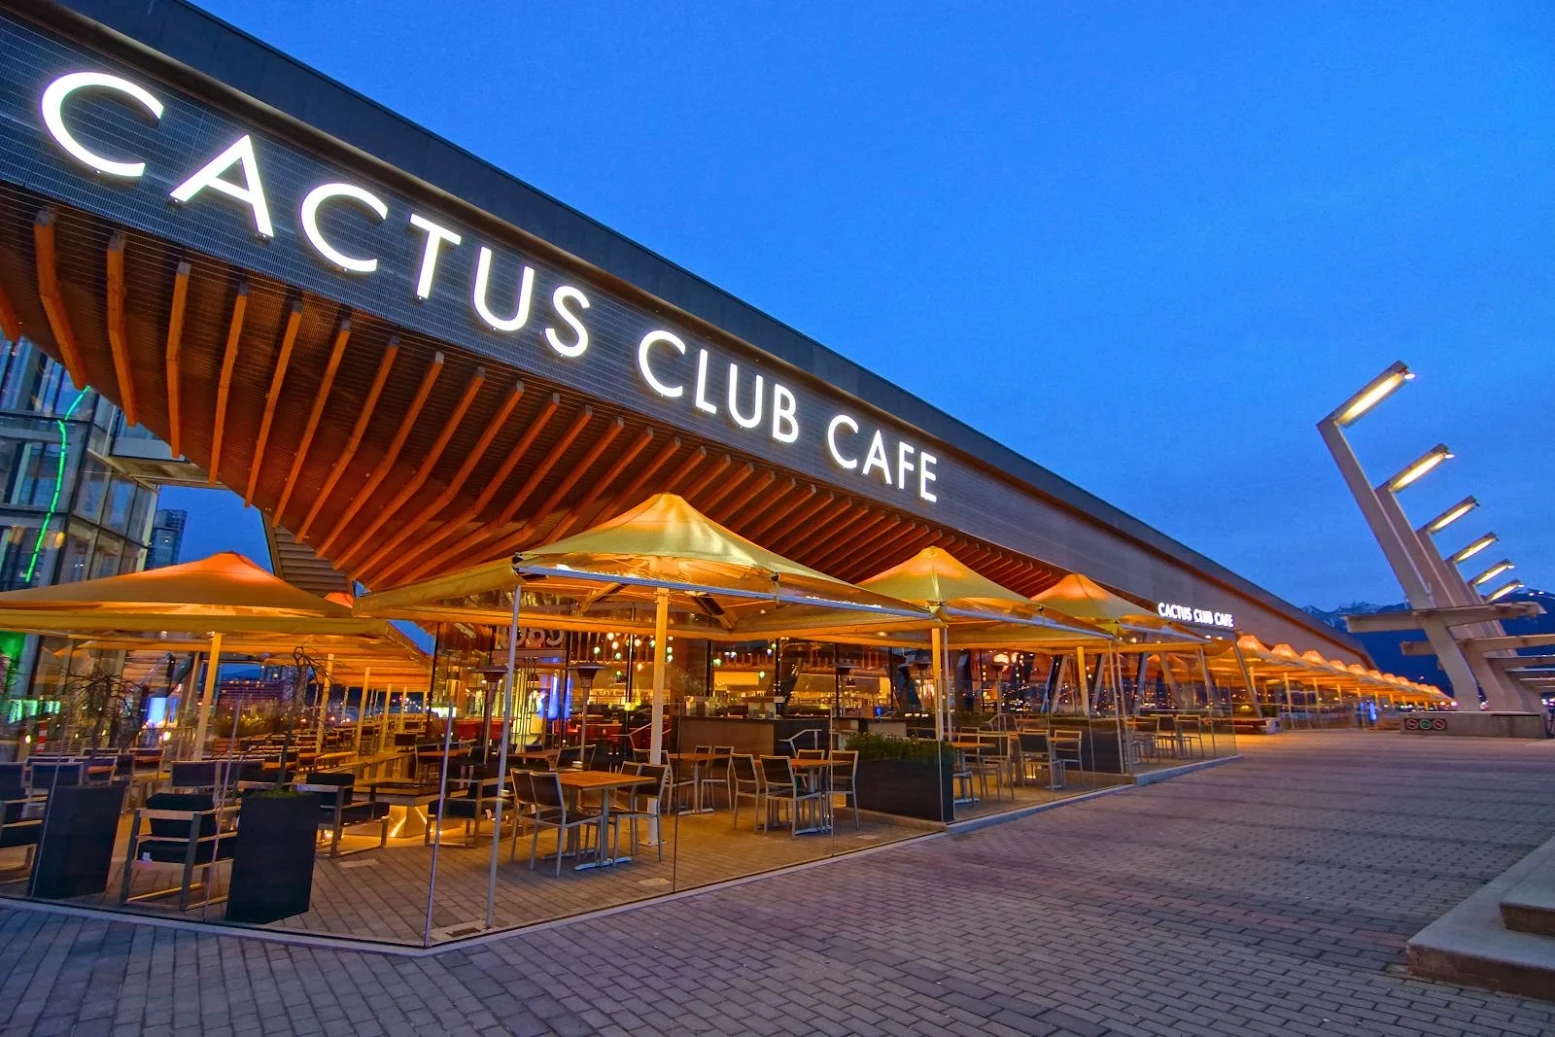 Cactus Club by Acton Ostry Architects